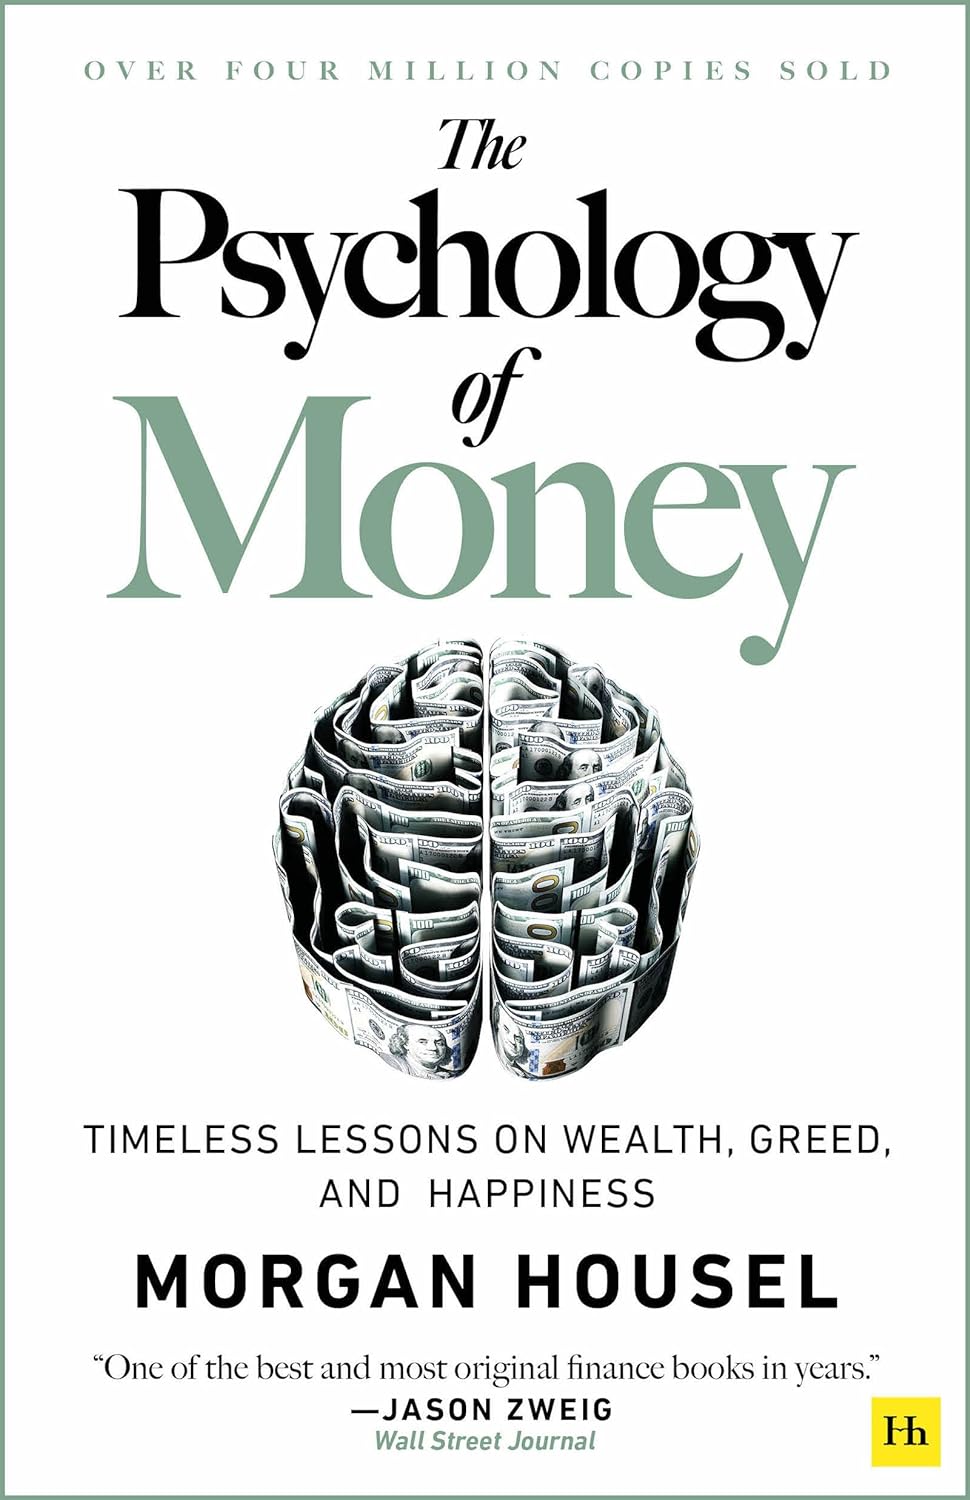 The Psychology of Money: Timeless lessons on wealth, greed, and happiness, by Morgan Housel